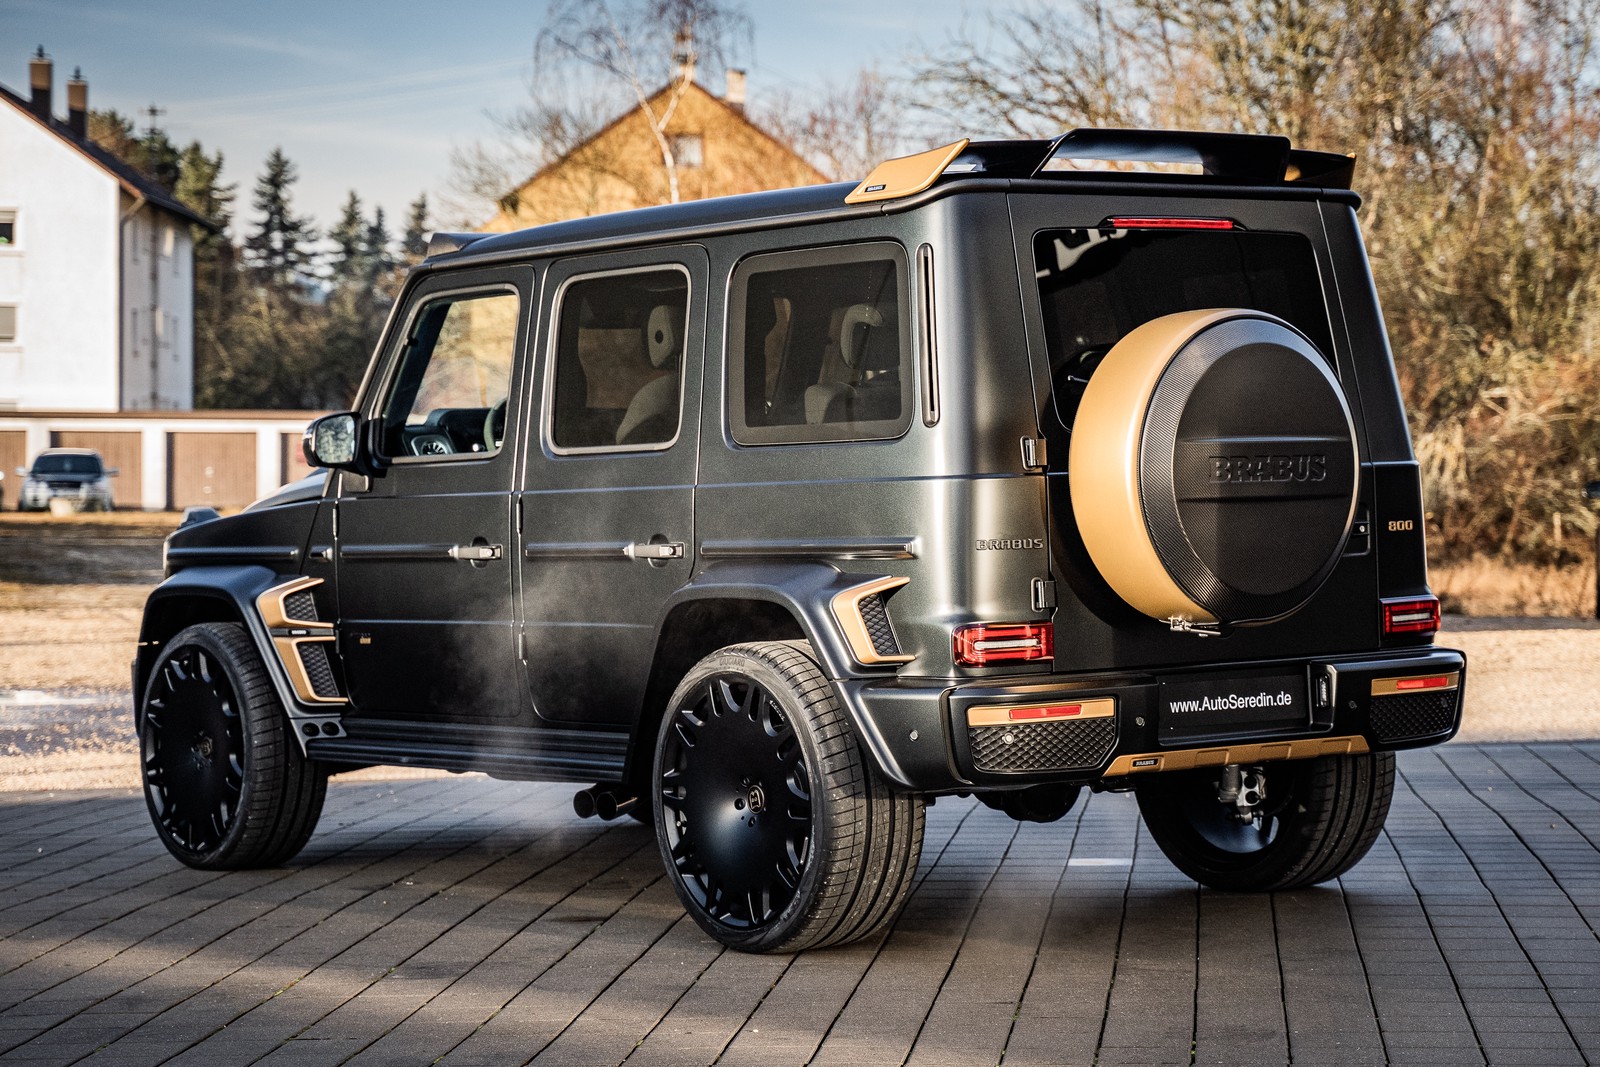 Mercedes-Benz G 63 BRABUS 800 GOLD EDITION - Auto Seredin - Germany - For  sale on LuxuryPulse.